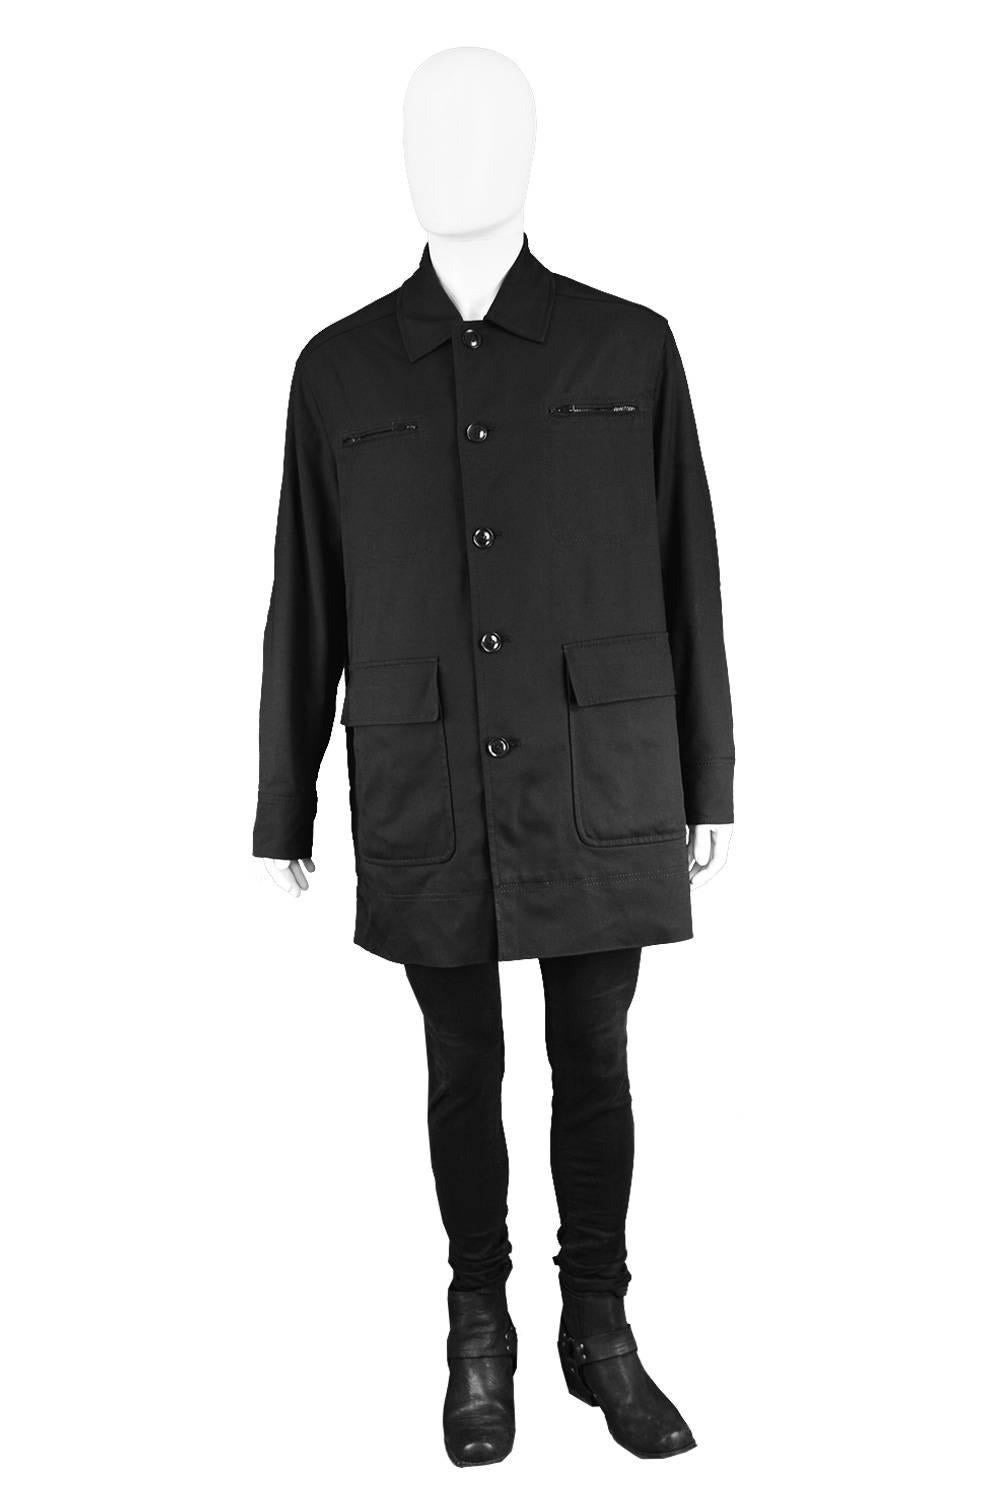 Byblos for Harrods Men's Black Classic Vintage Top Coat, 1990s

Size: Marked 50 which is roughly a men's Medium to Large and would suit a taller man as the sleeves are a little long, so check sleeve measurement. 
Chest - 48” / 122cm (has a loose,